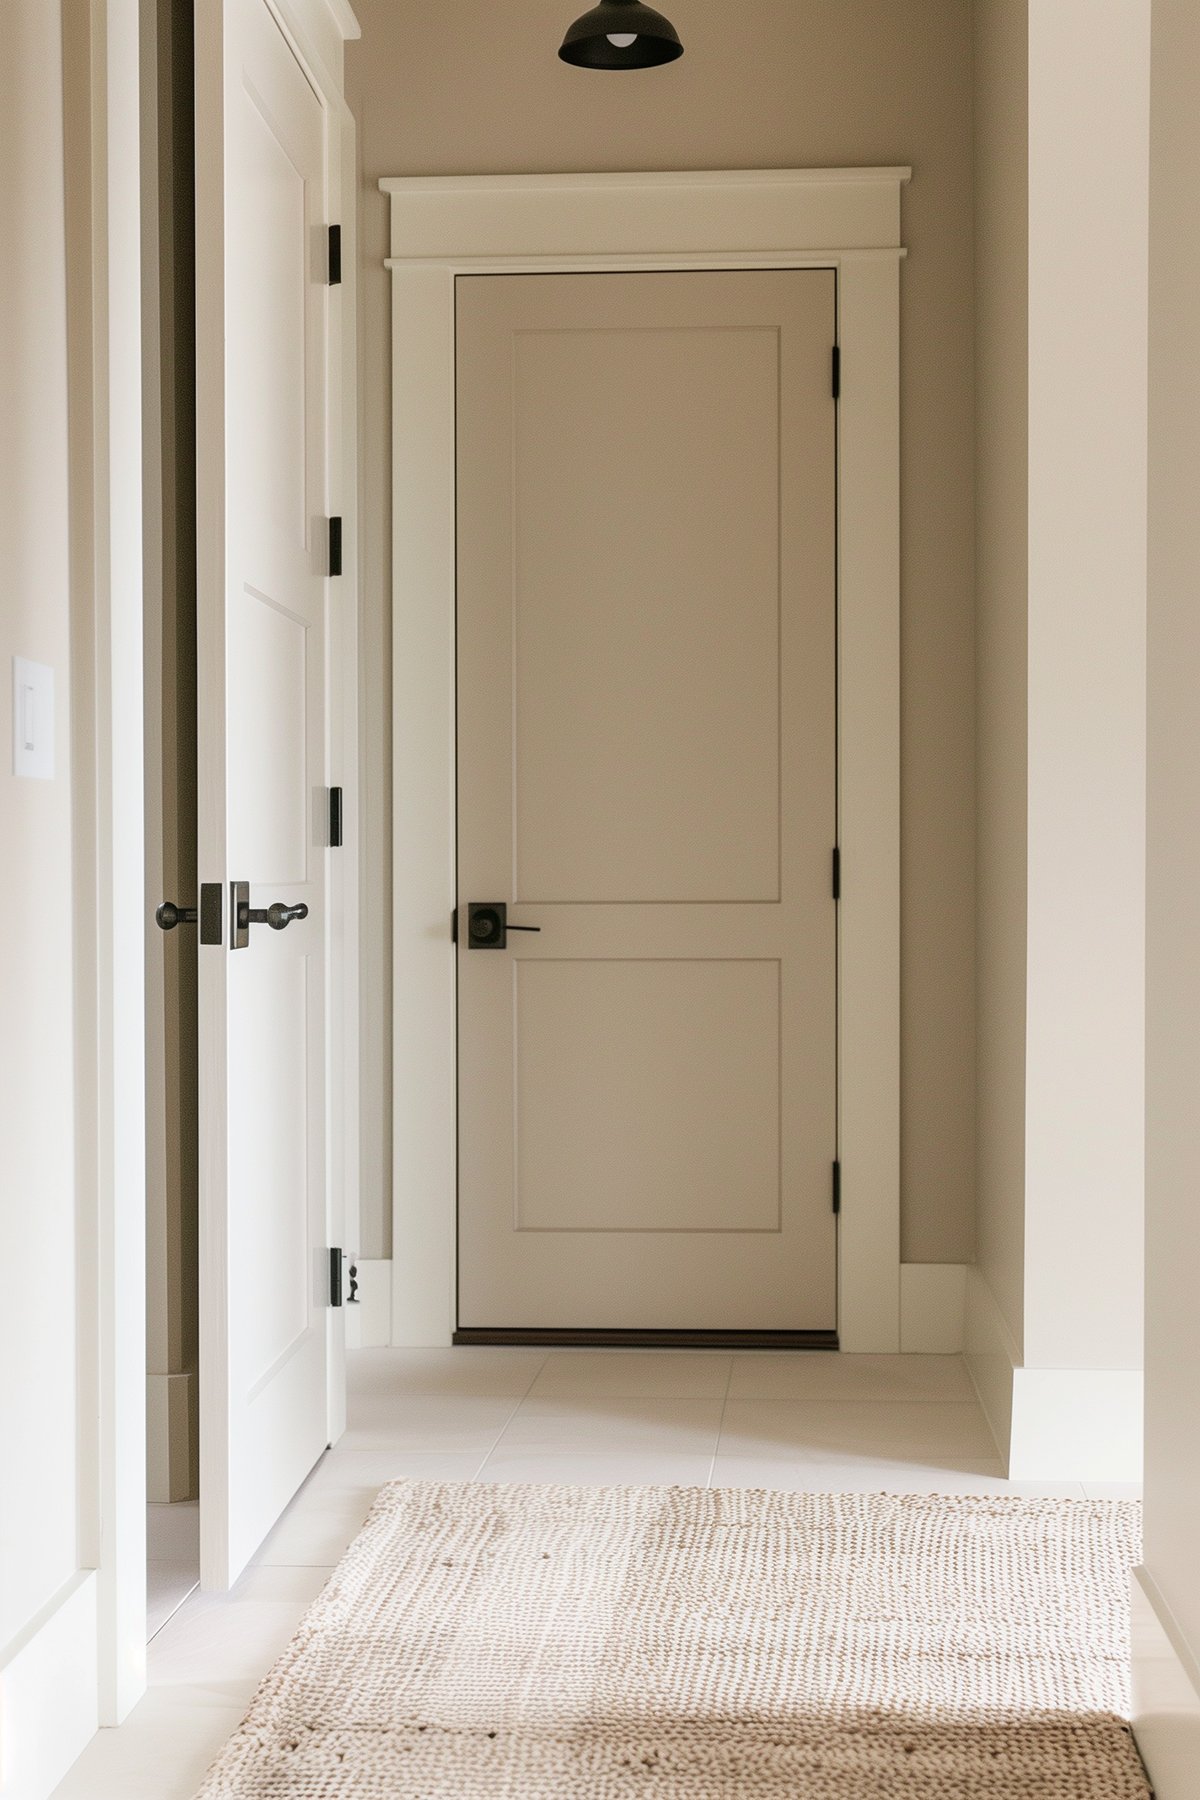 Hallway with a door painted Sherwin Williams Accessible Beige with black hardware.